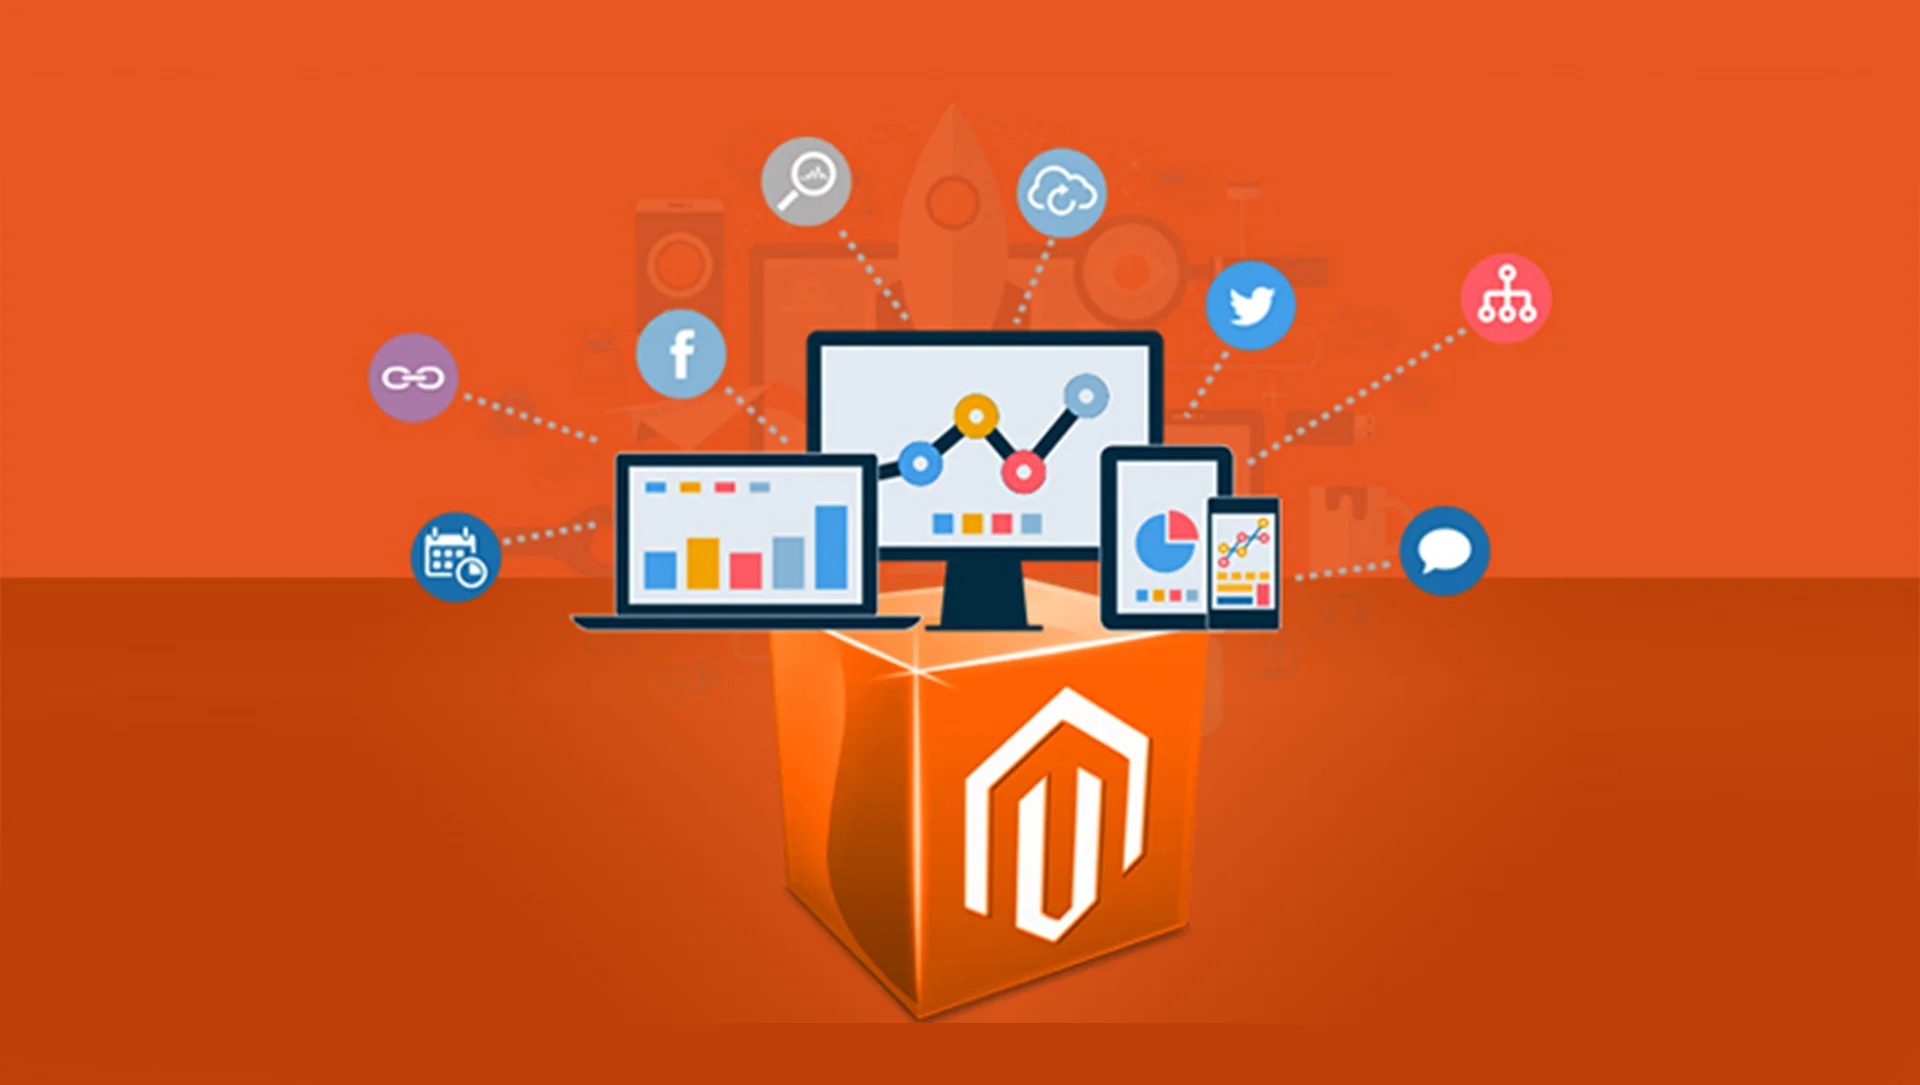 magento-ecommerce-platform-review-category-page-image